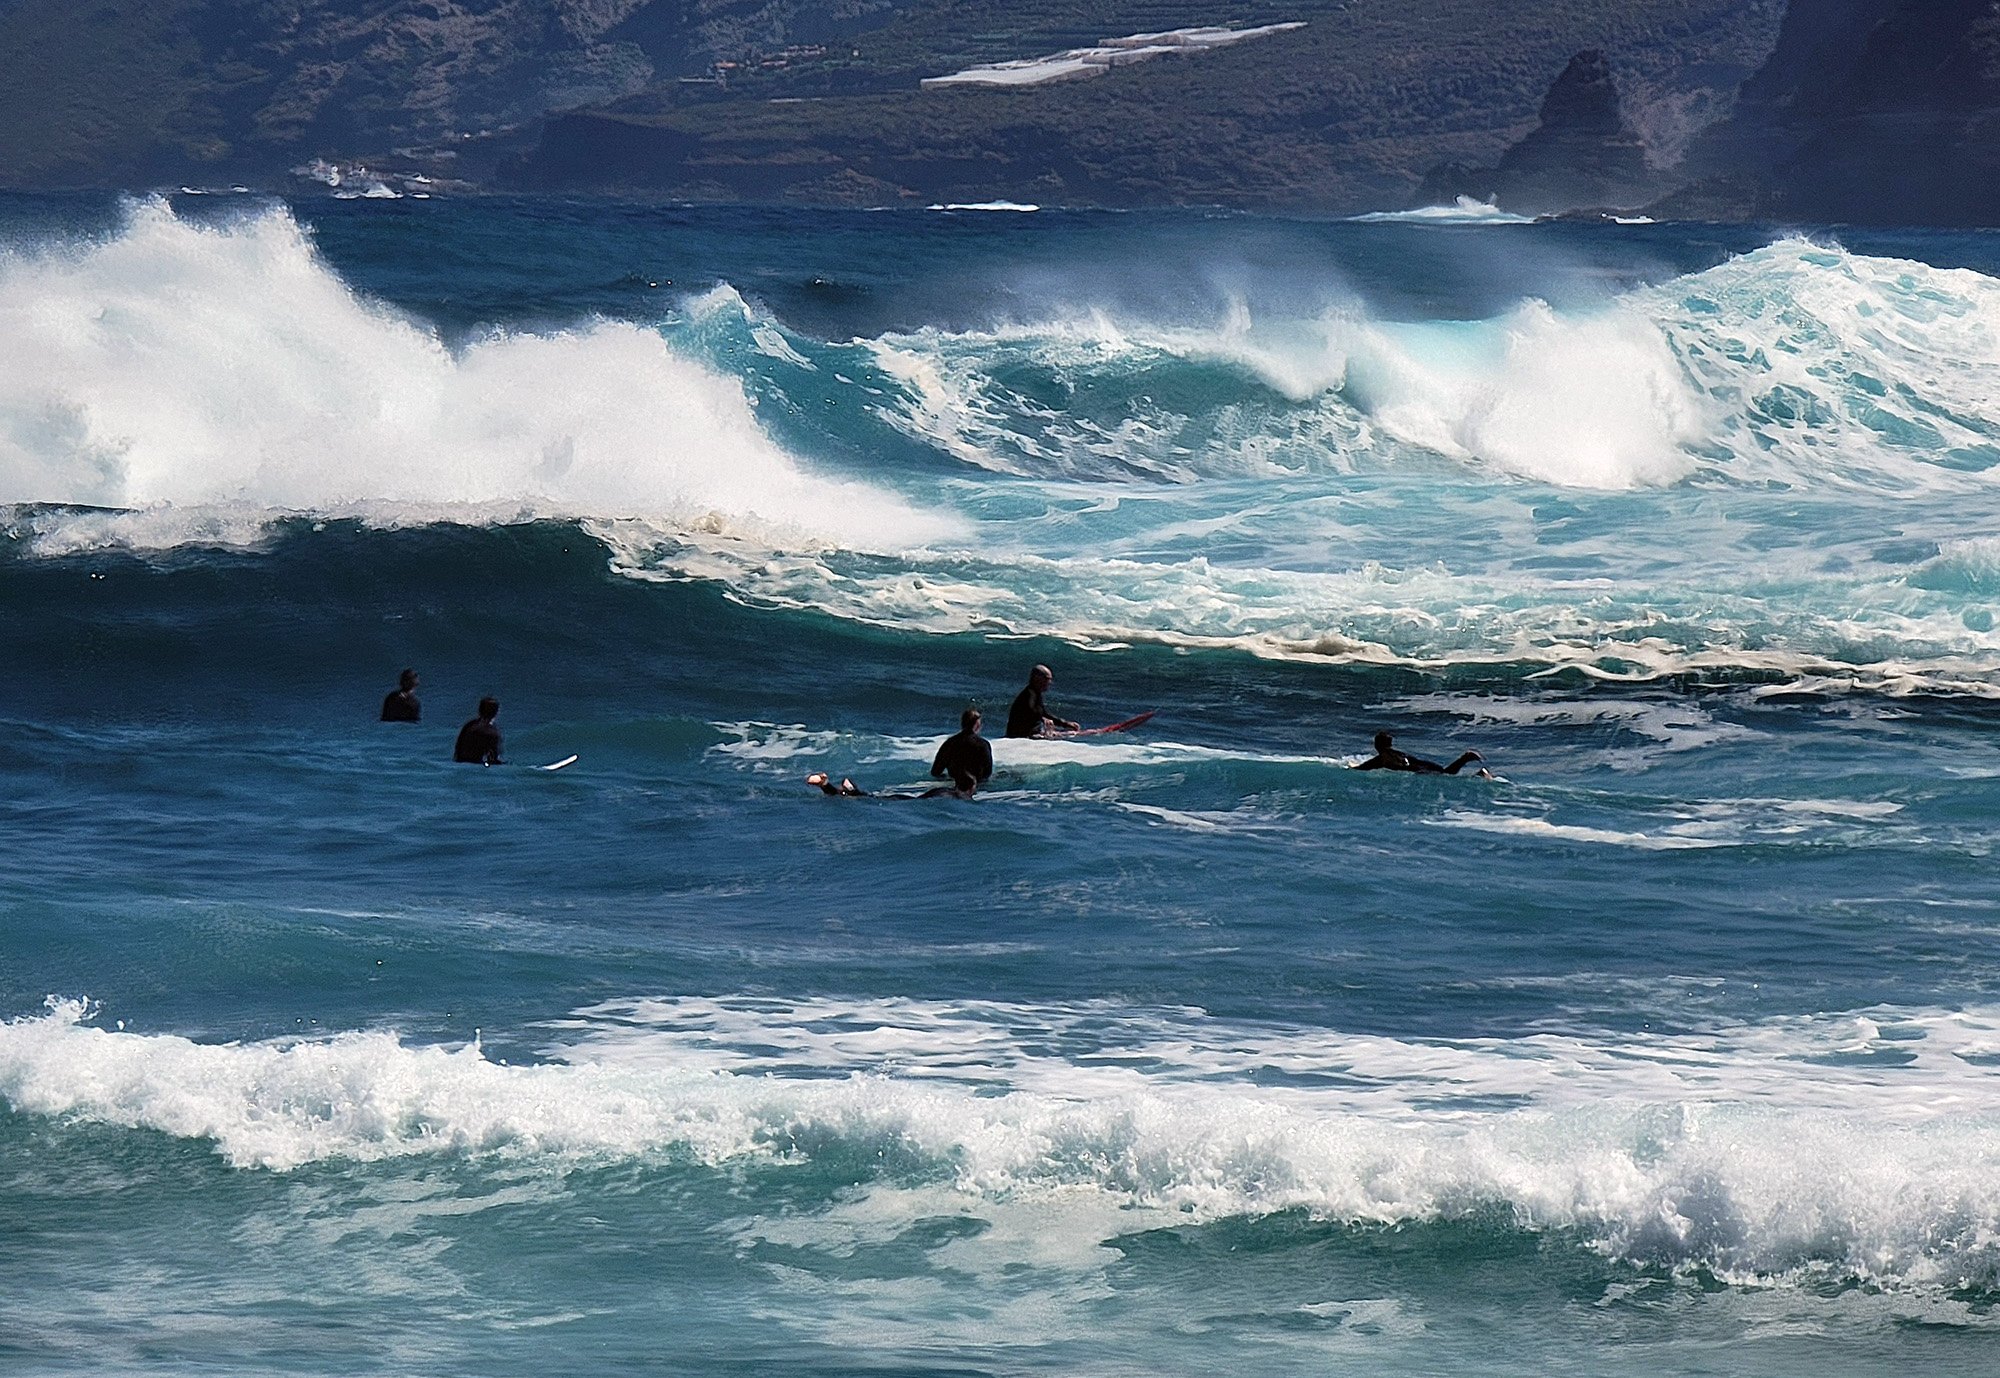 Surfing on some pretty crazy waves.